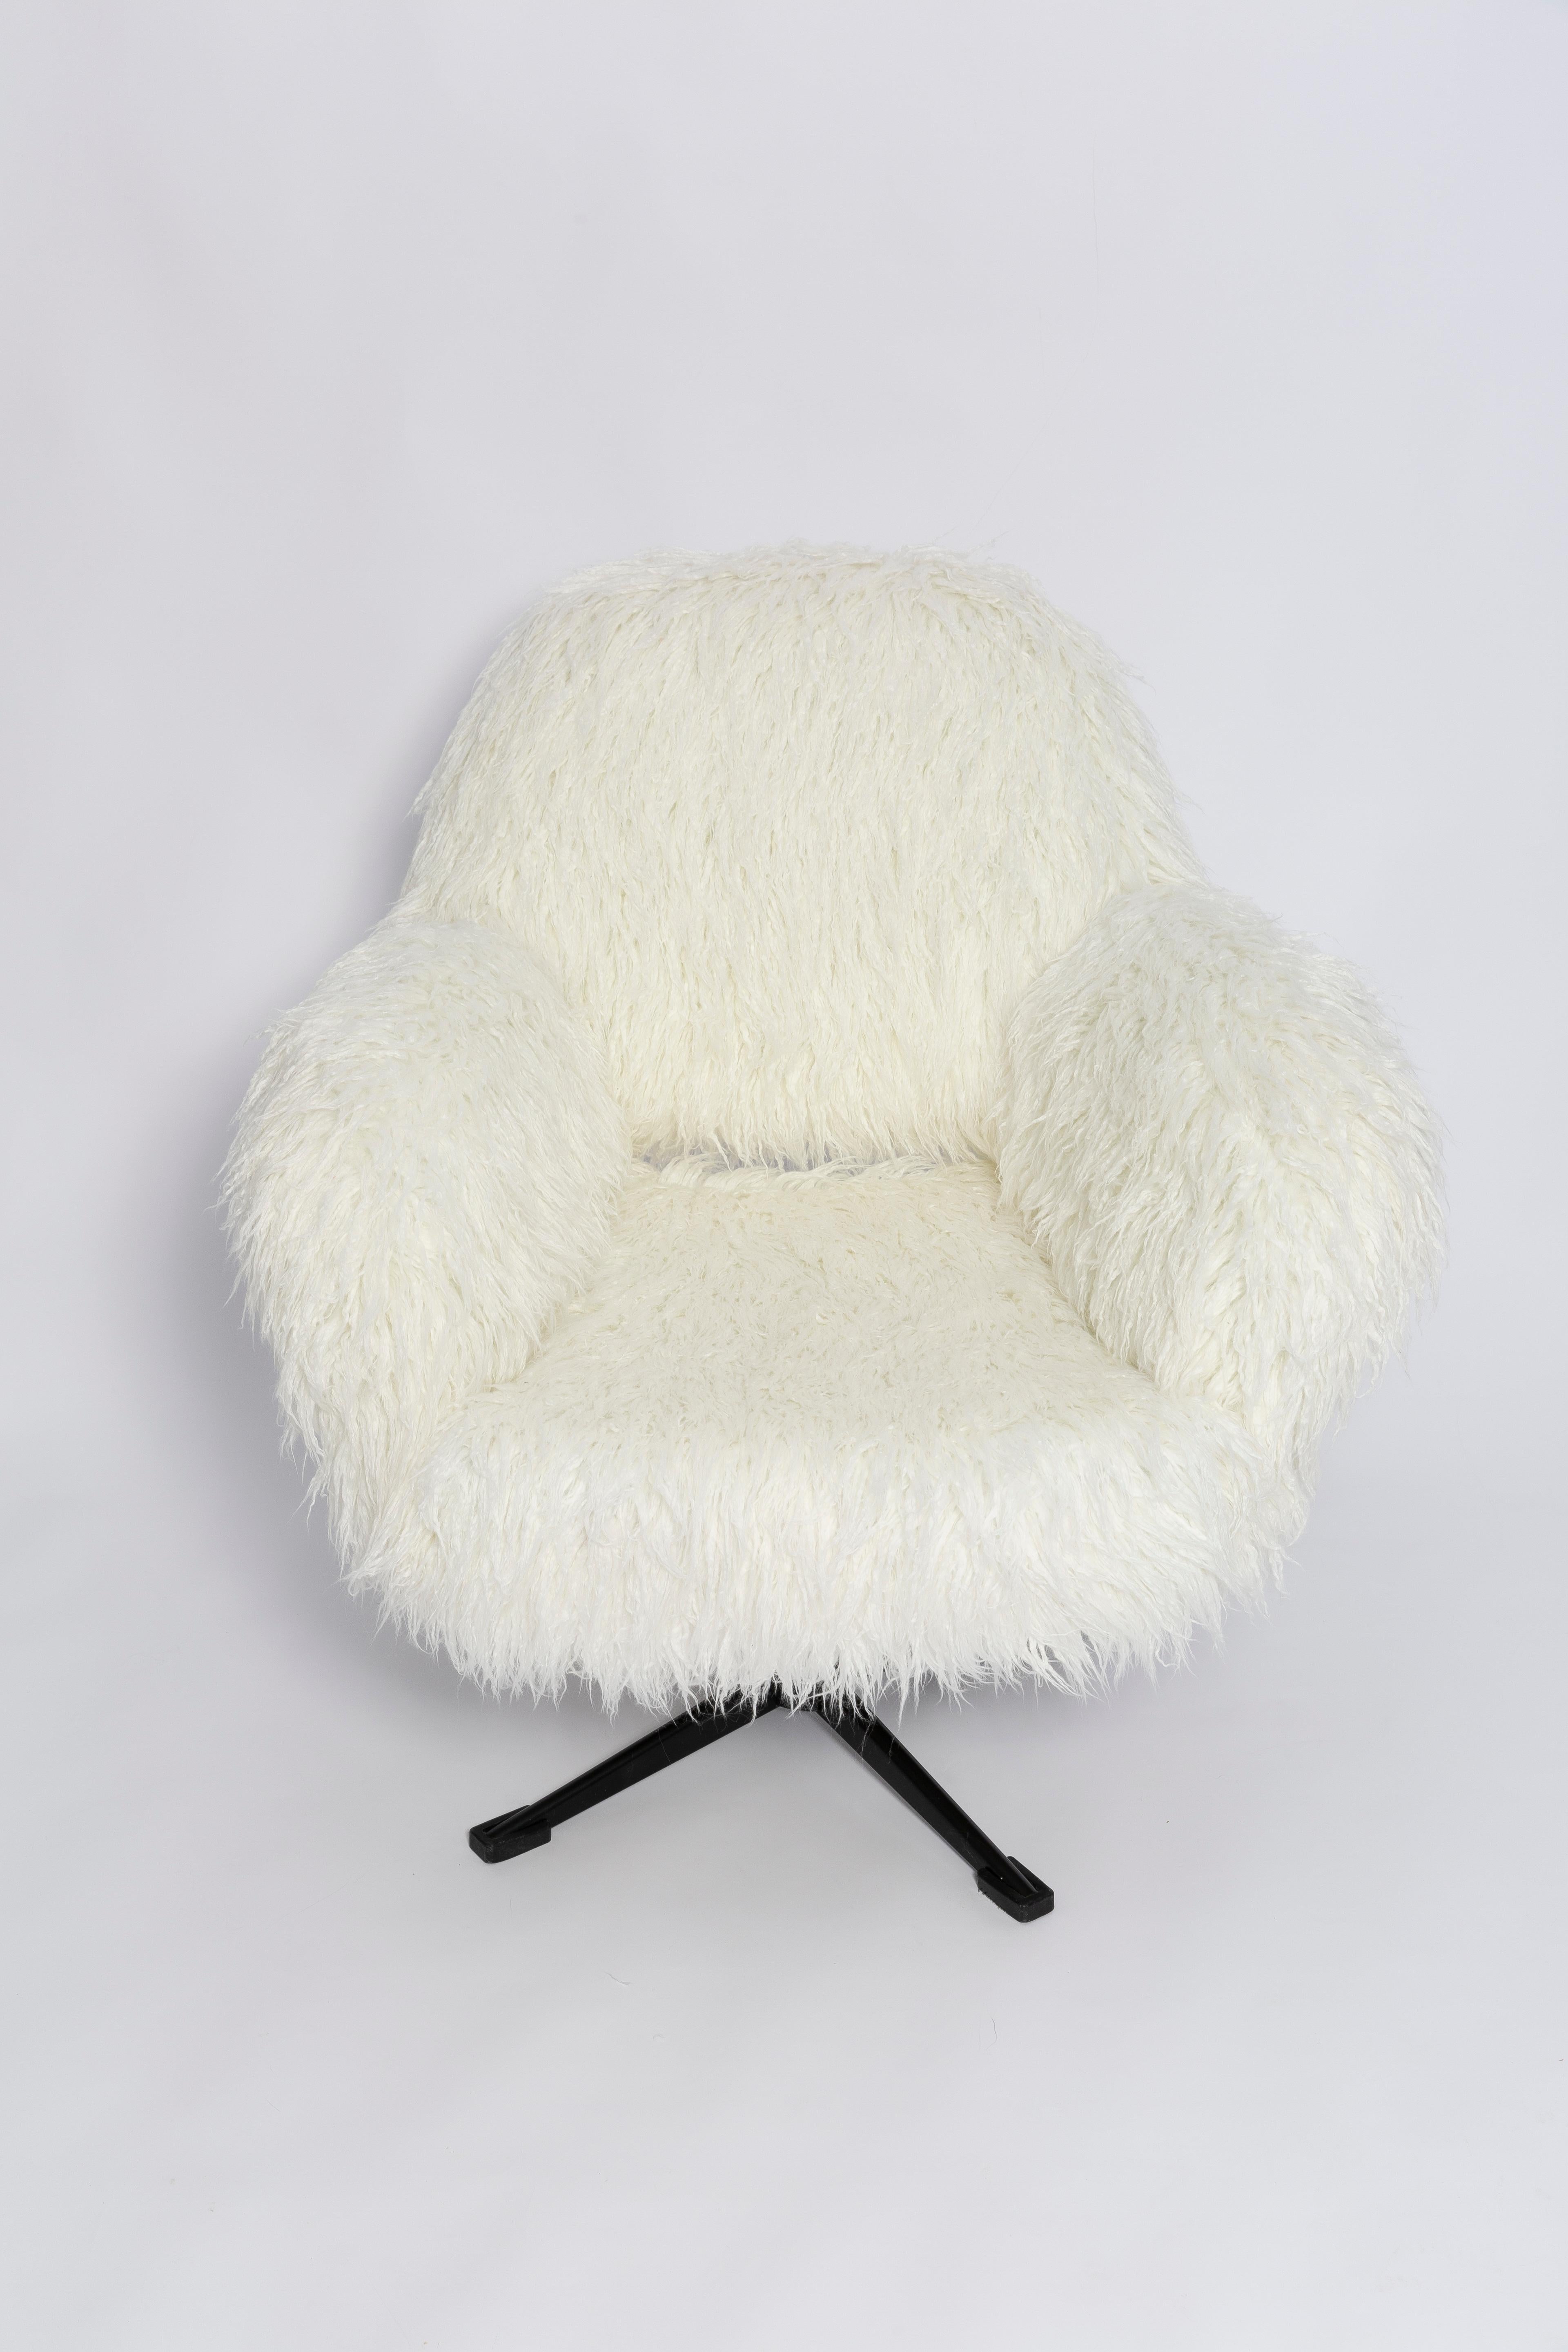 Pair of 20th Century Vintage White Faux Alpaca Hair Swivel Armchairs, 1960s For Sale 4